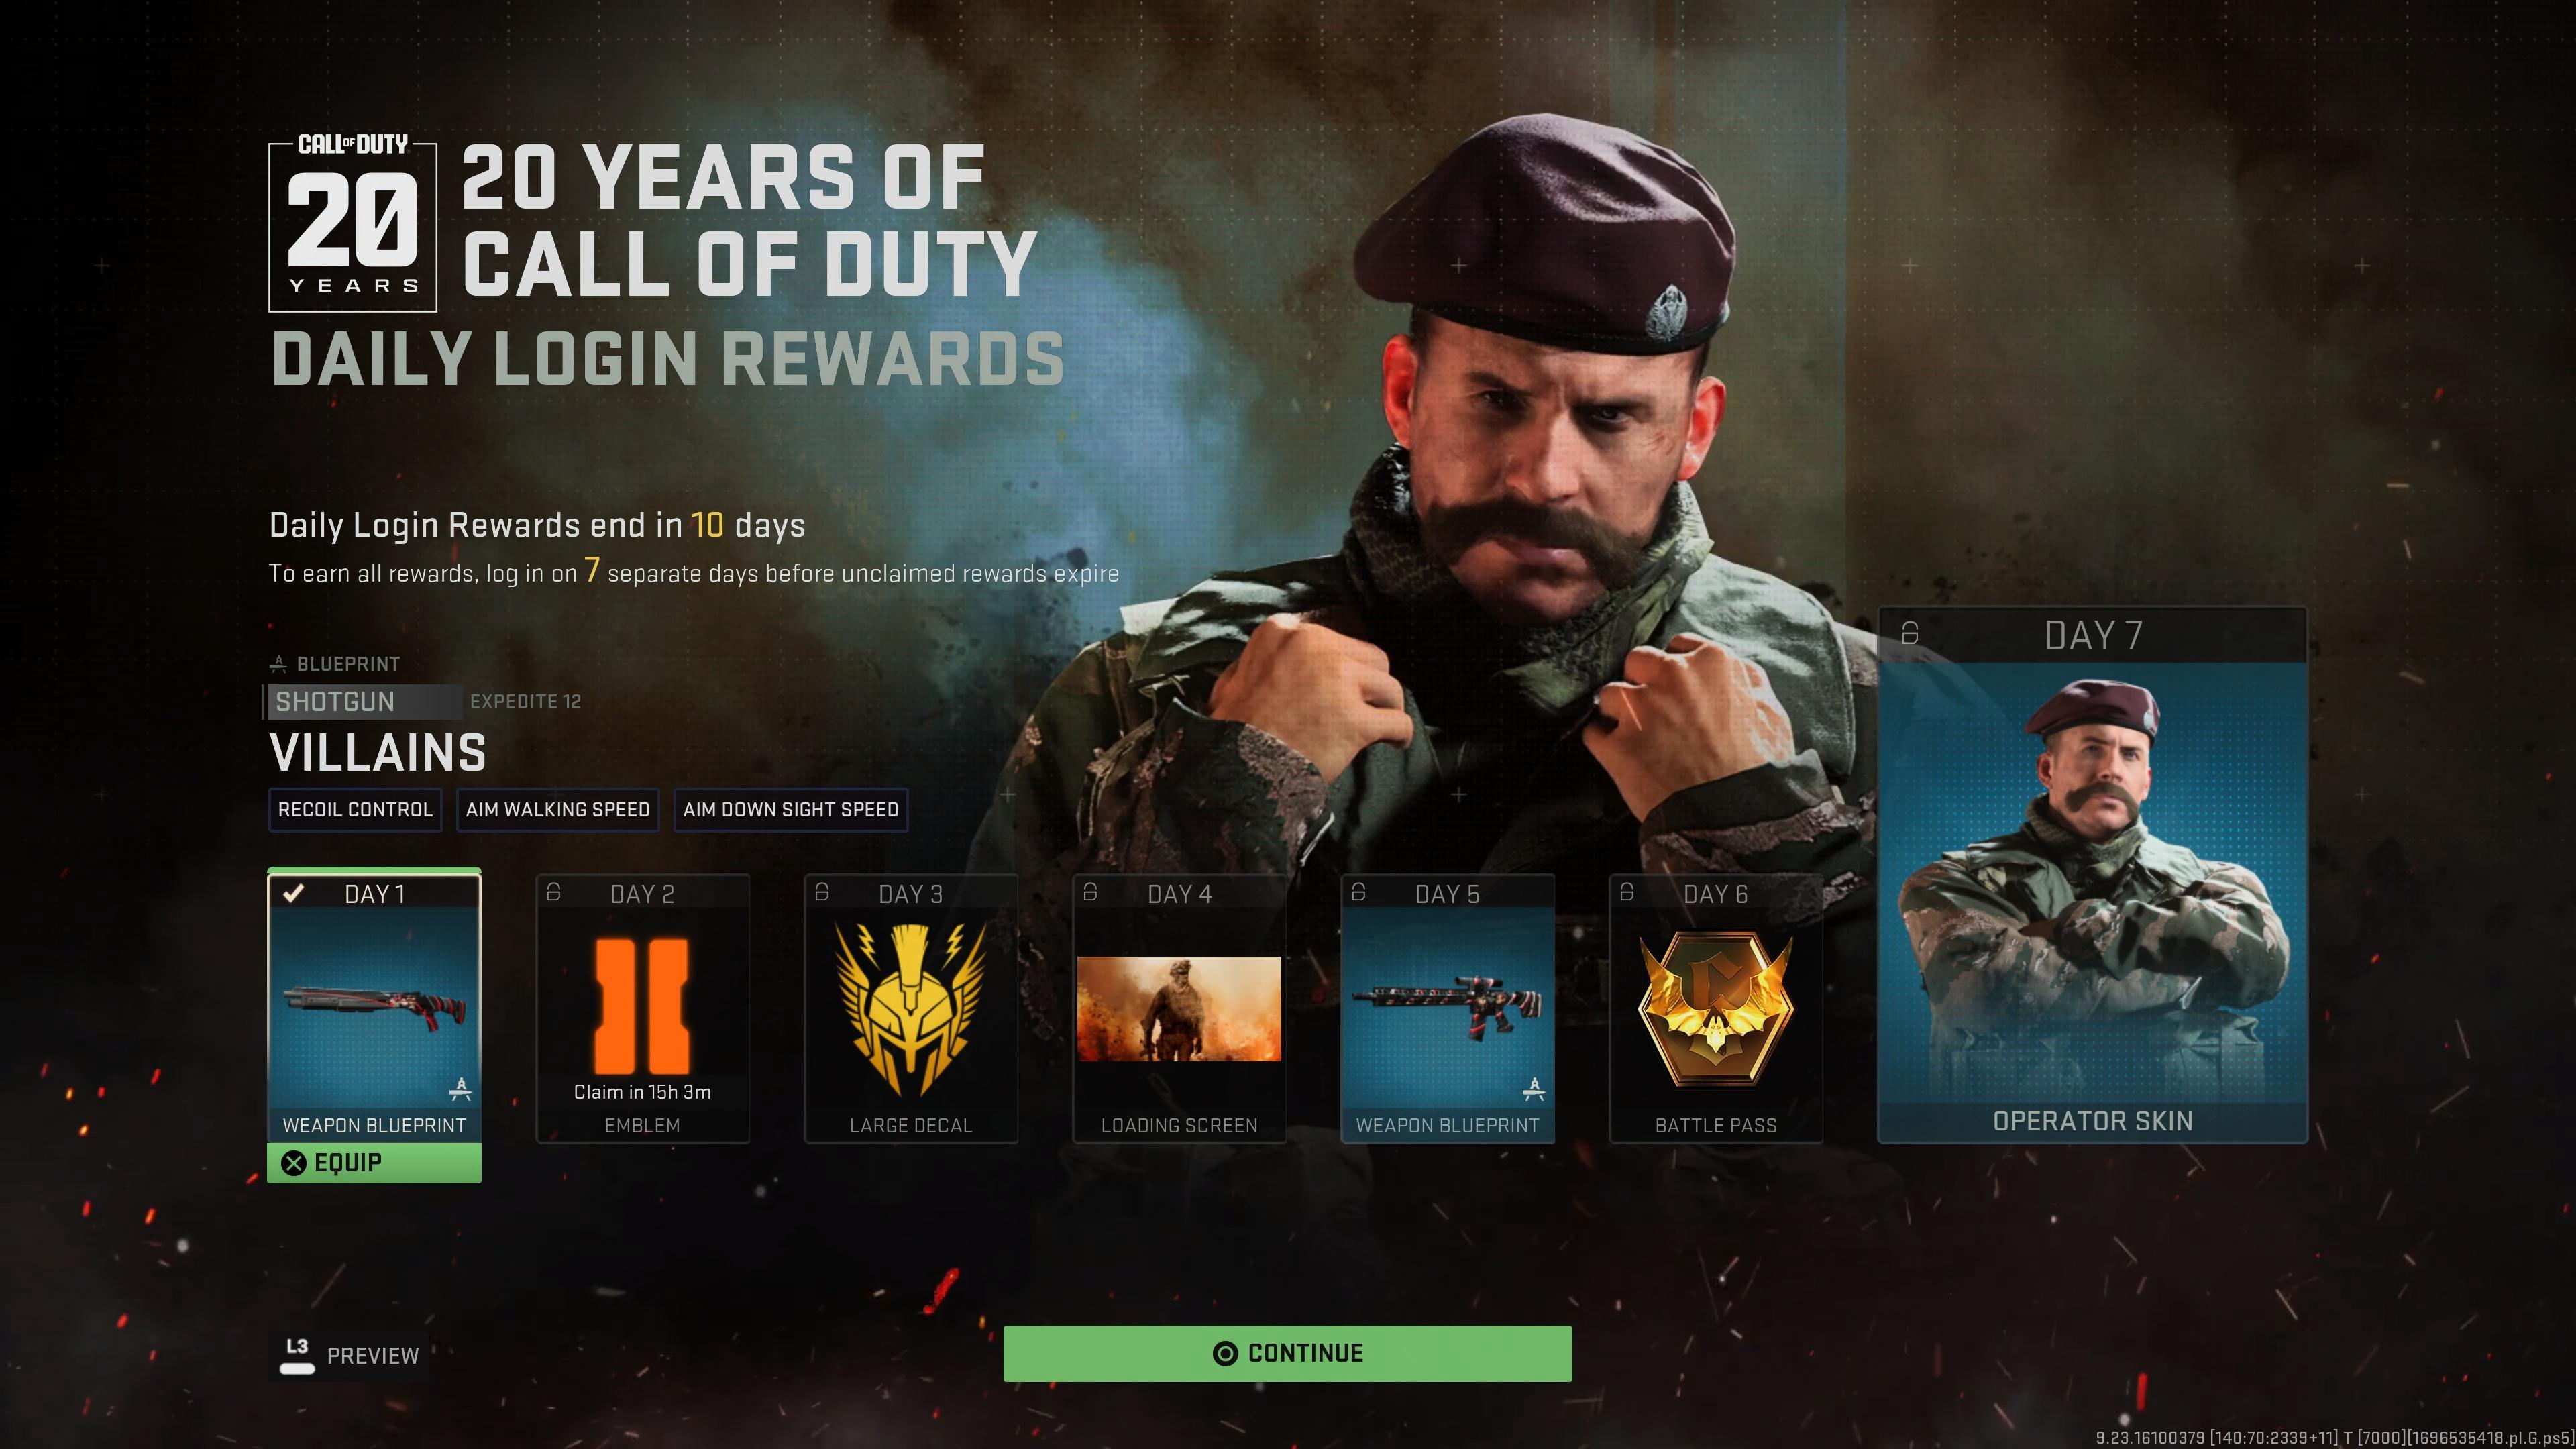 20 years of call of duty daily login rewards